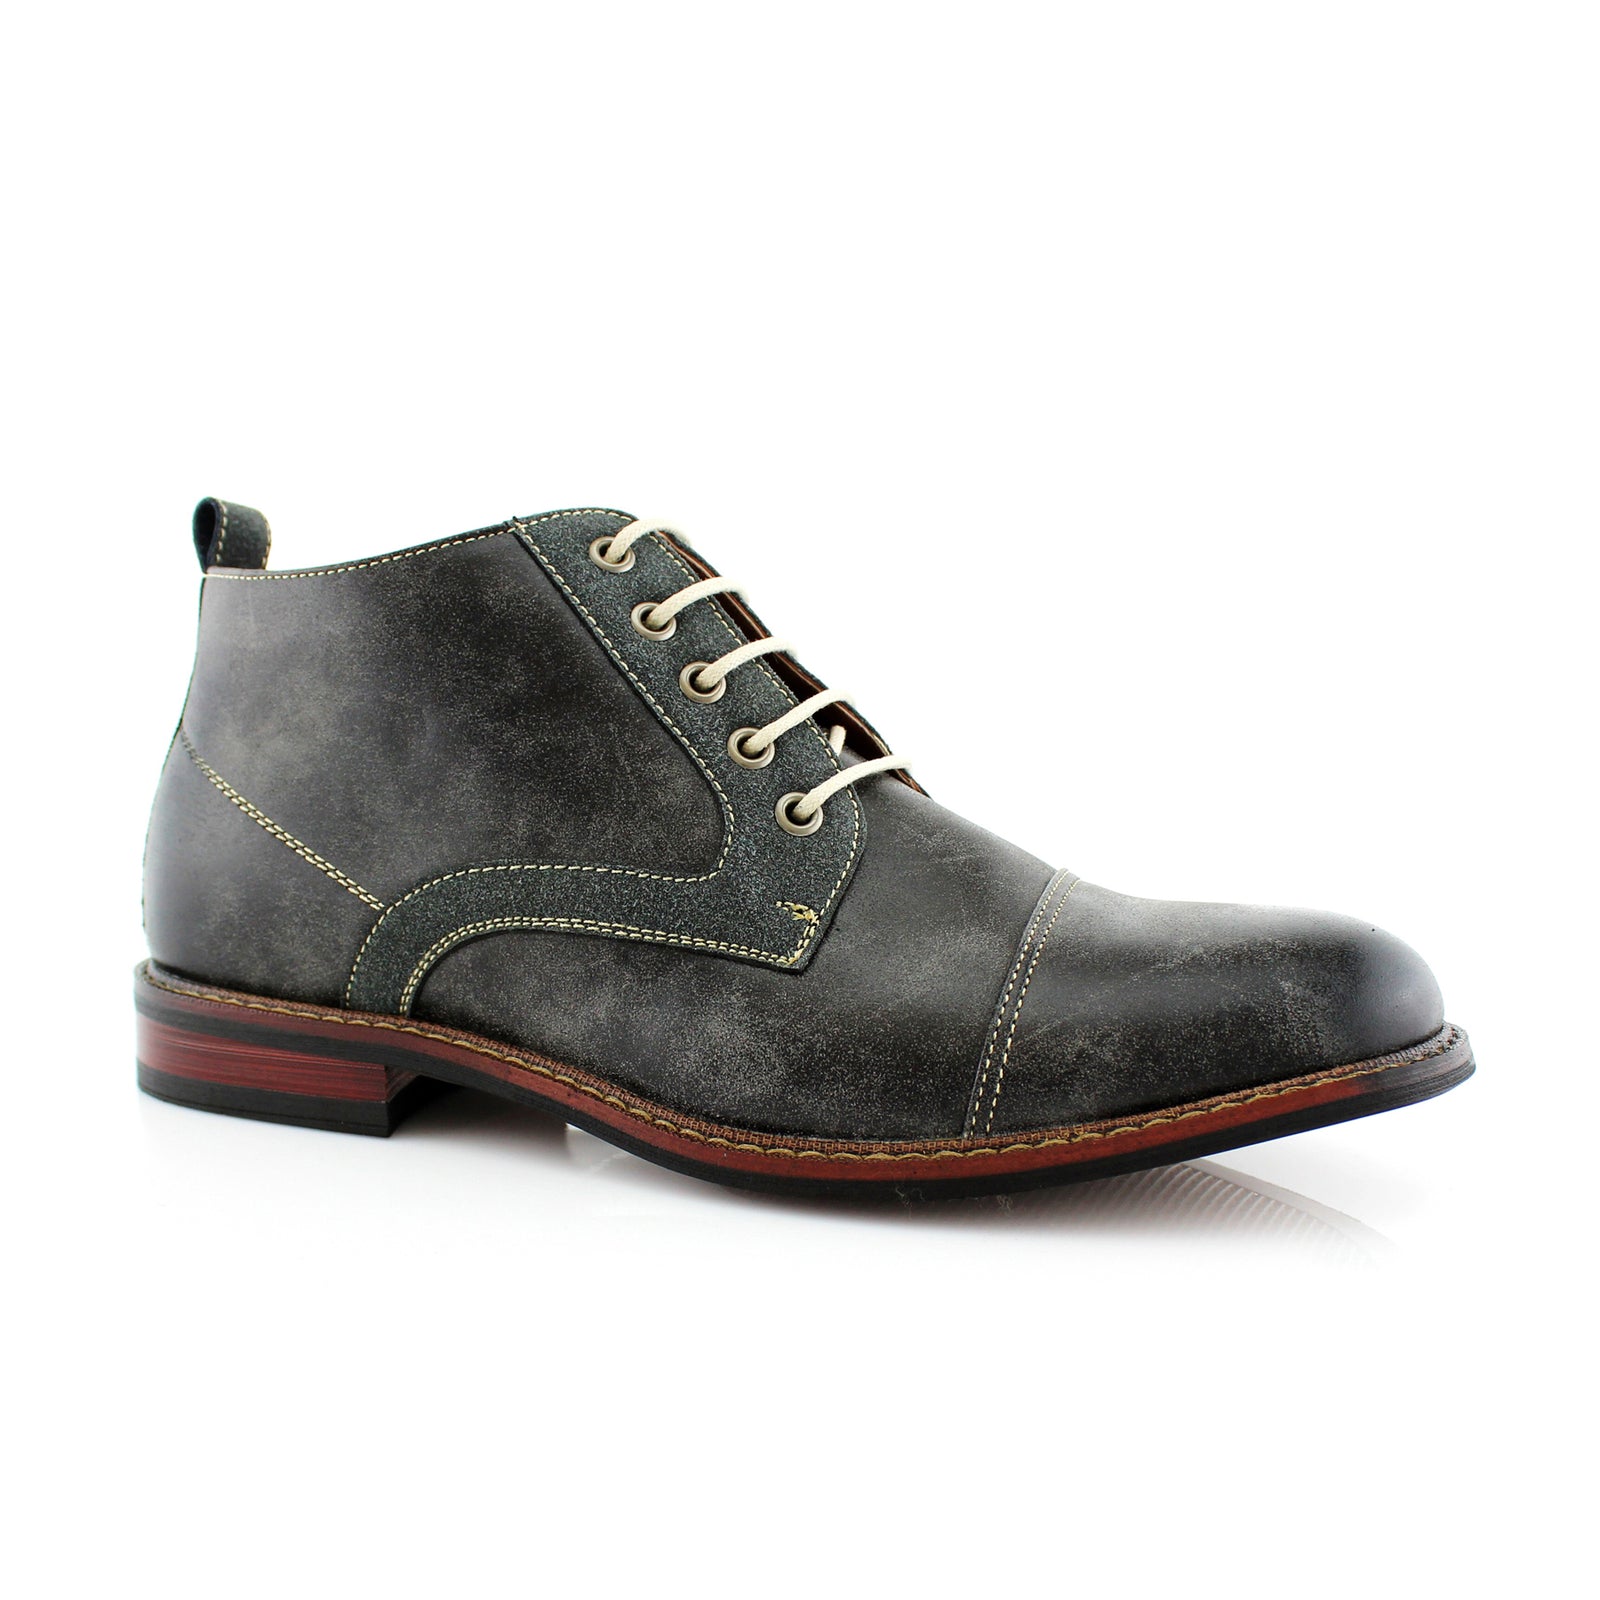 Duo-Textured Ankle Boots For Men | ELI | Ferro Aldo Walking Shoes To Buy